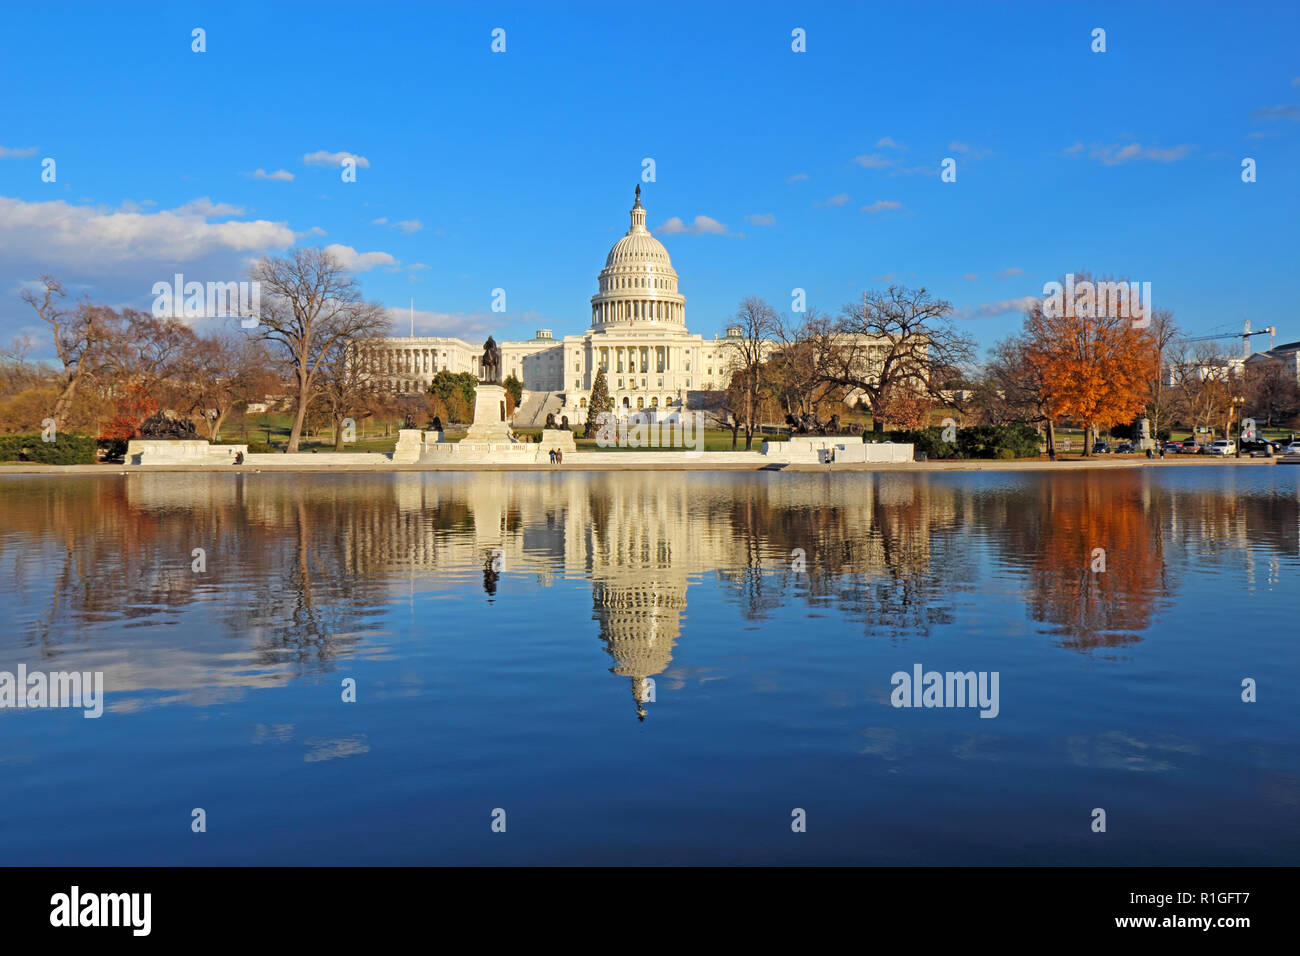 The west side of the United States Capitol building and Ulysses S Grant memorial in Washington, DC reflected in the reflecting pool with Christmas tre Stock Photo